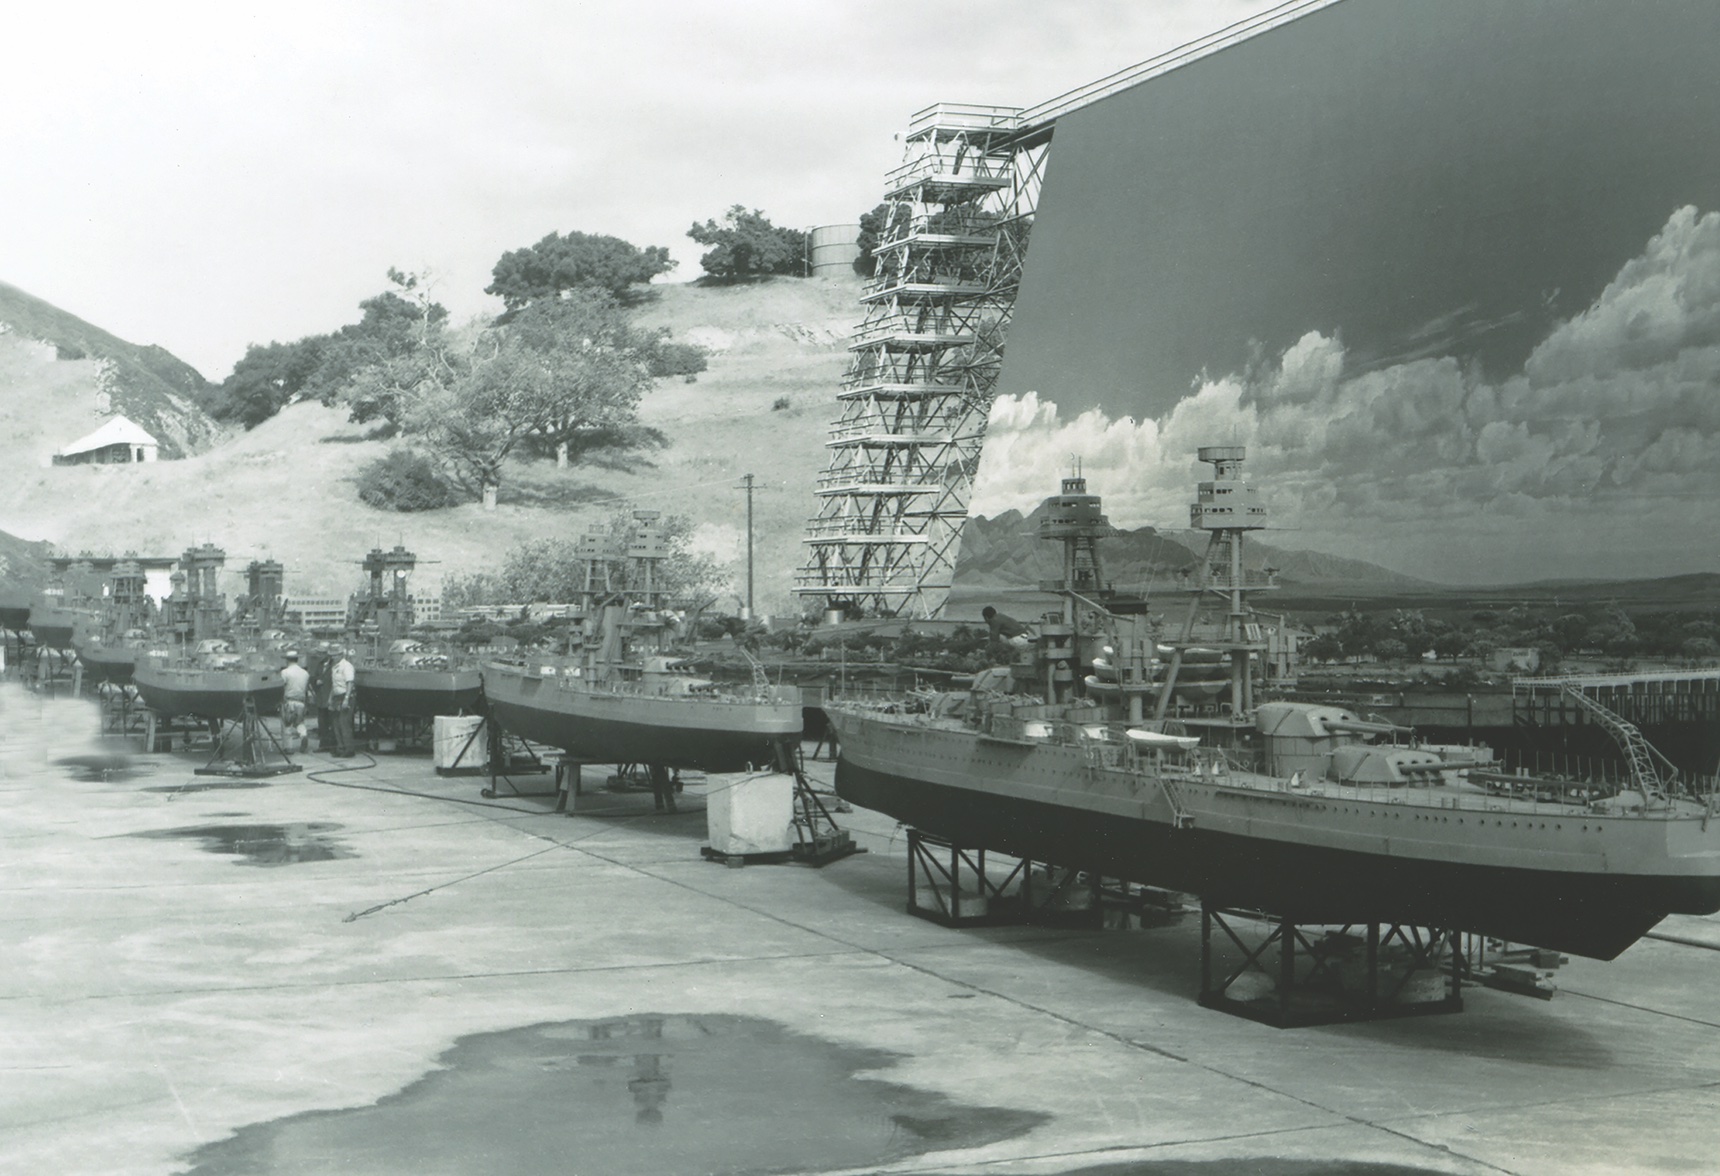 The miniatures department at Twentieth Century Fox built 29 scale-model ships for Tora! Tora! Tora! Some are shown here in front of the studioâ€™s Sersen tank, with the mammoth â€œsky dropâ€ in the background. (University of New Mexico)